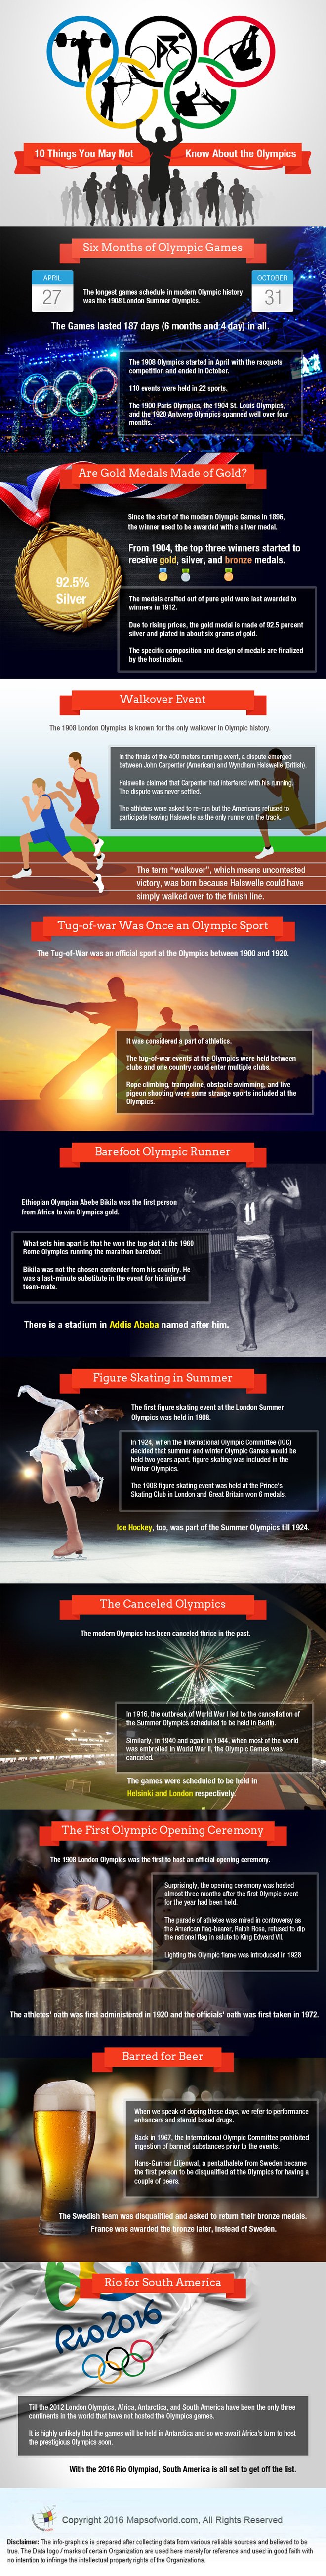 10 Things You May Not Know about the Olympics